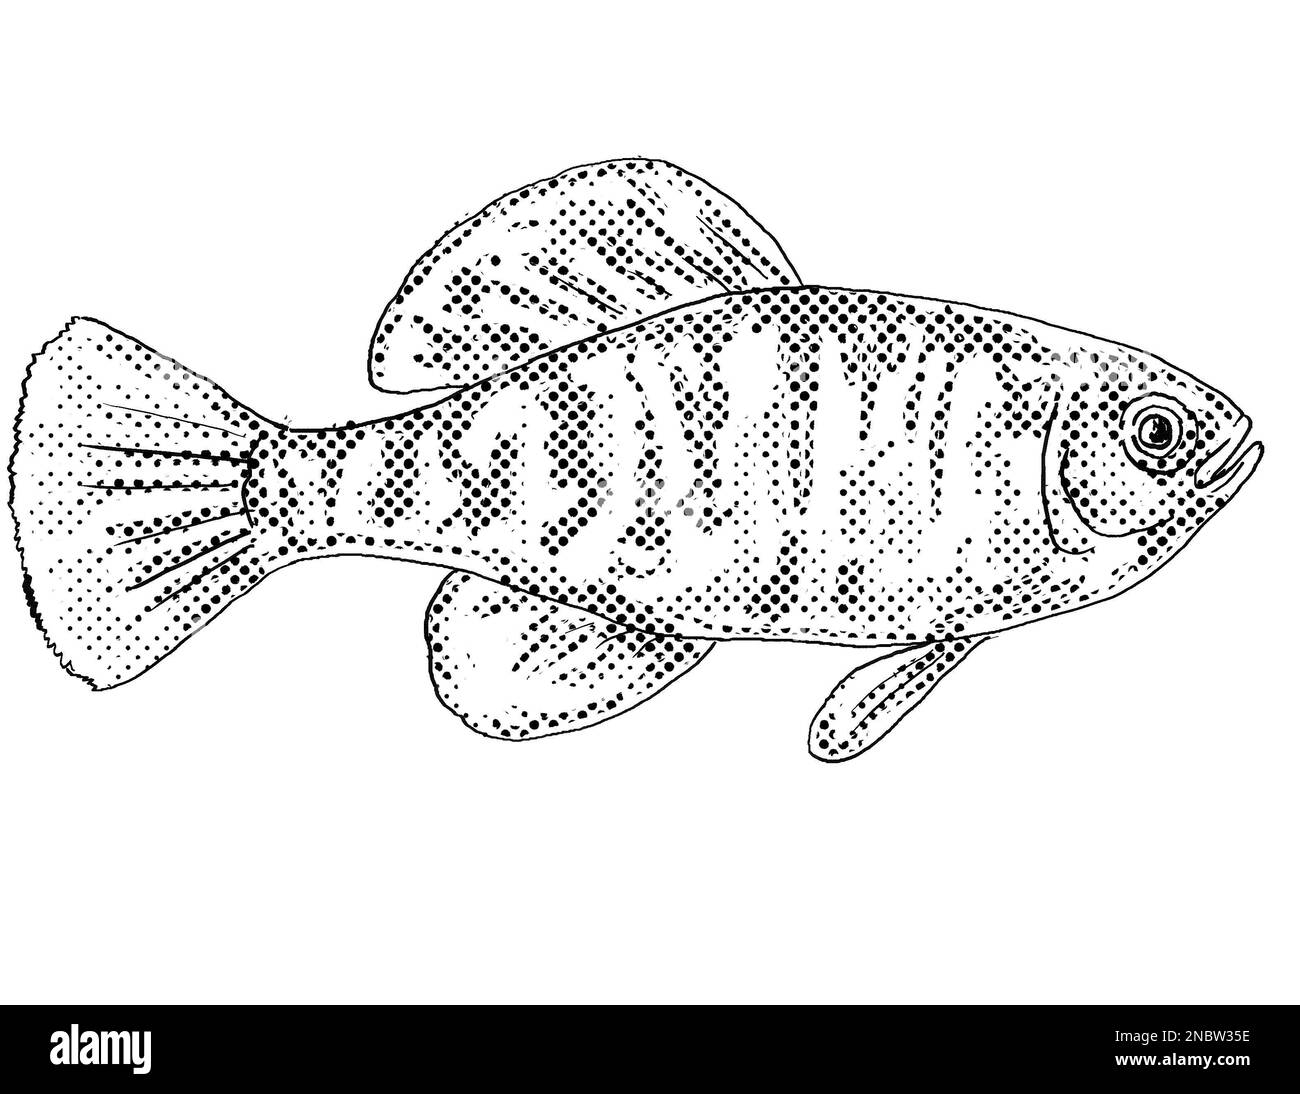 Cartoon style line drawing of a Gulf Coast pygmy sunfish or Elassoma gilberti, a freshwater fish endemic to North America with halftone dots shading. Stock Photo